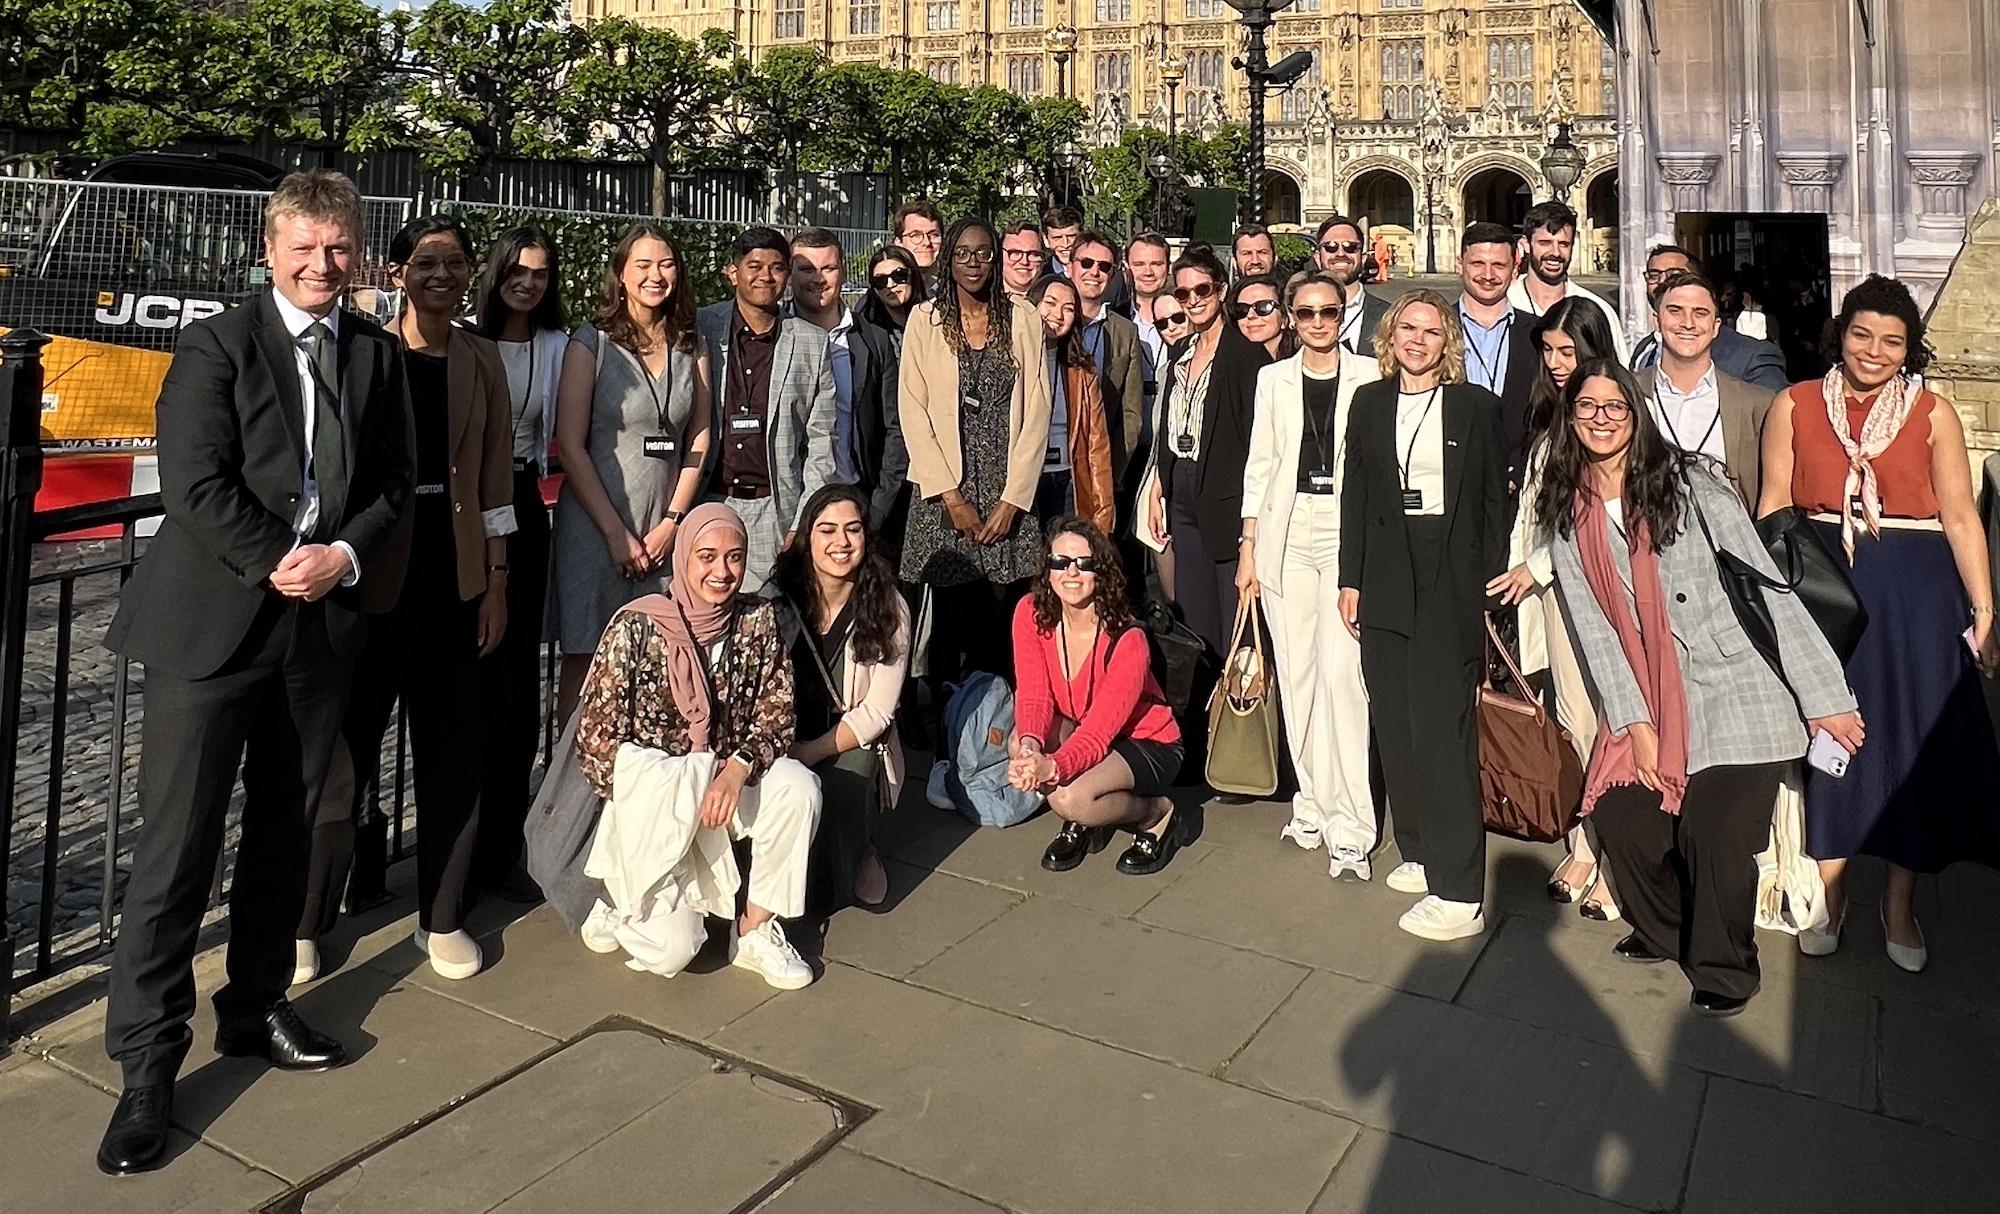 Group Photo outside of Houses of Parliament